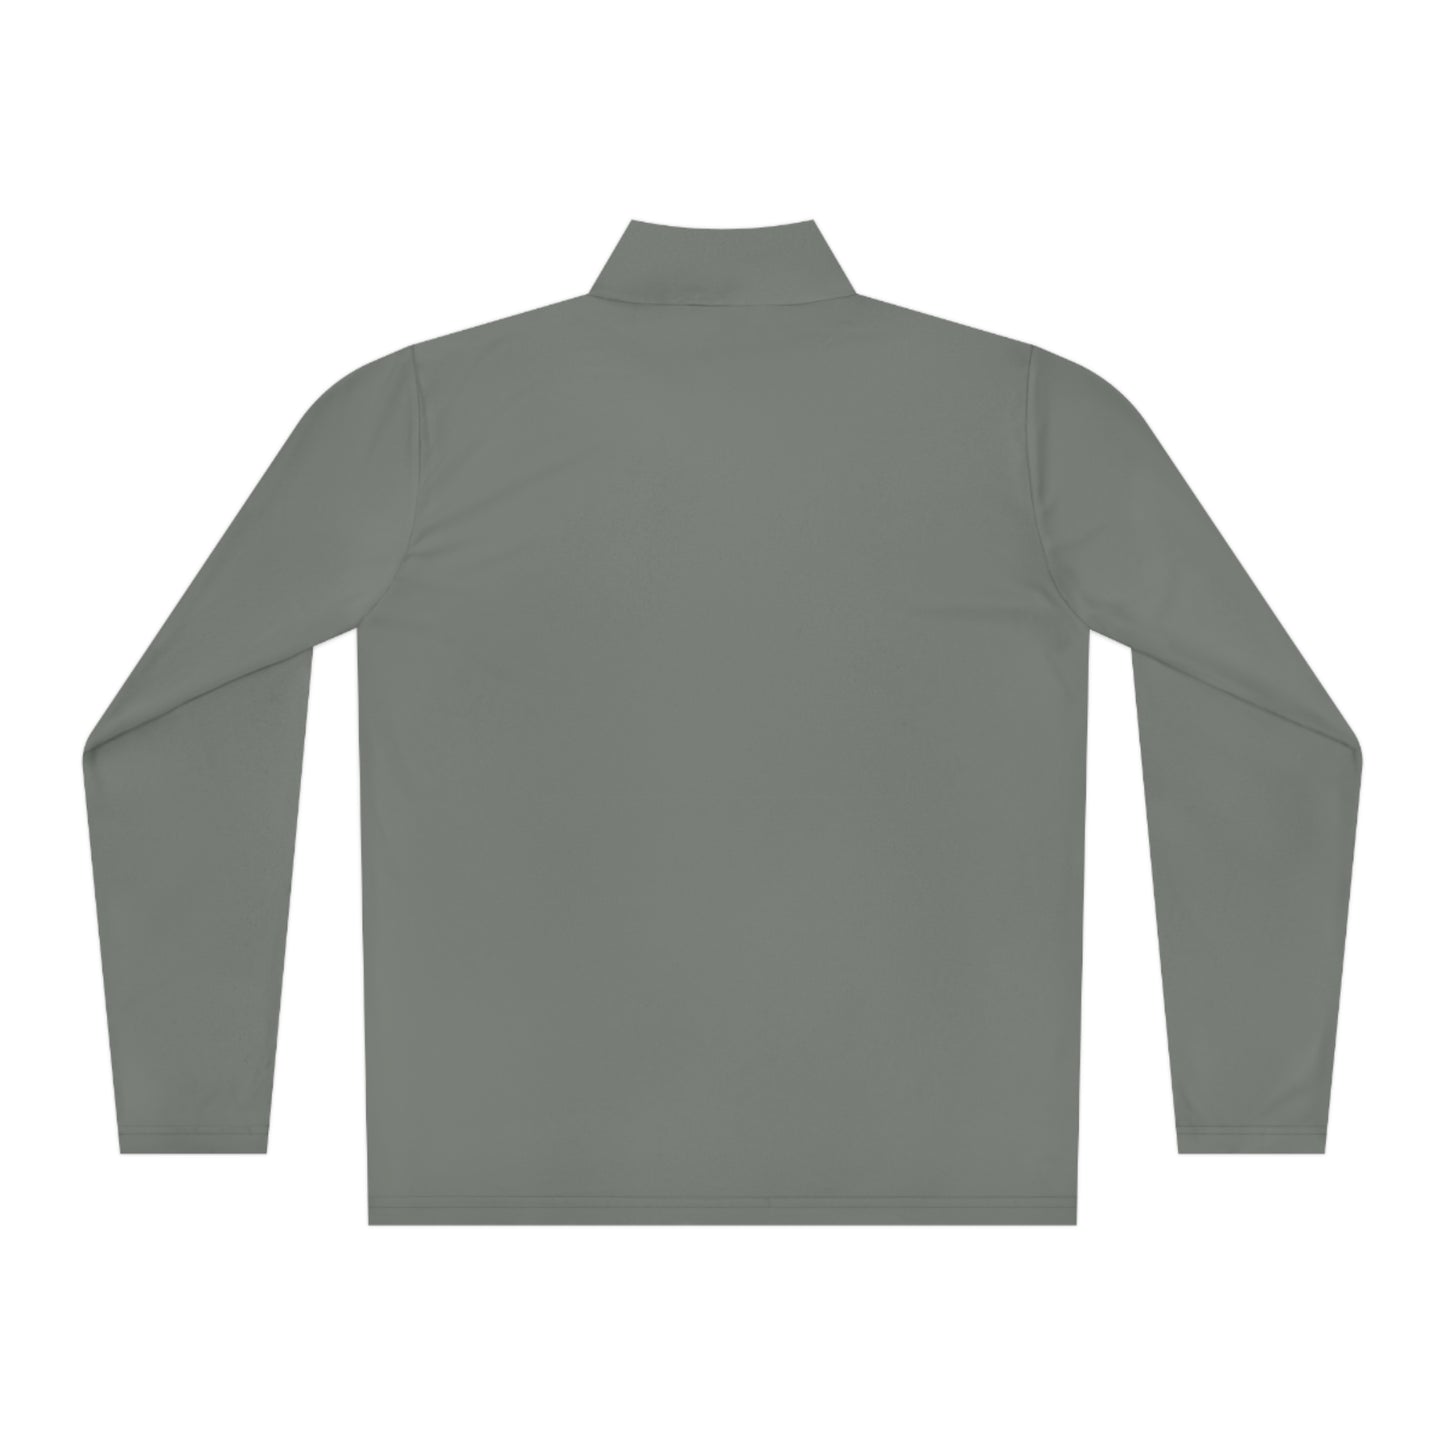 Ath"leisure" Collection- Ath"leisure" Adult Unisex Quarter-Zip Pullover